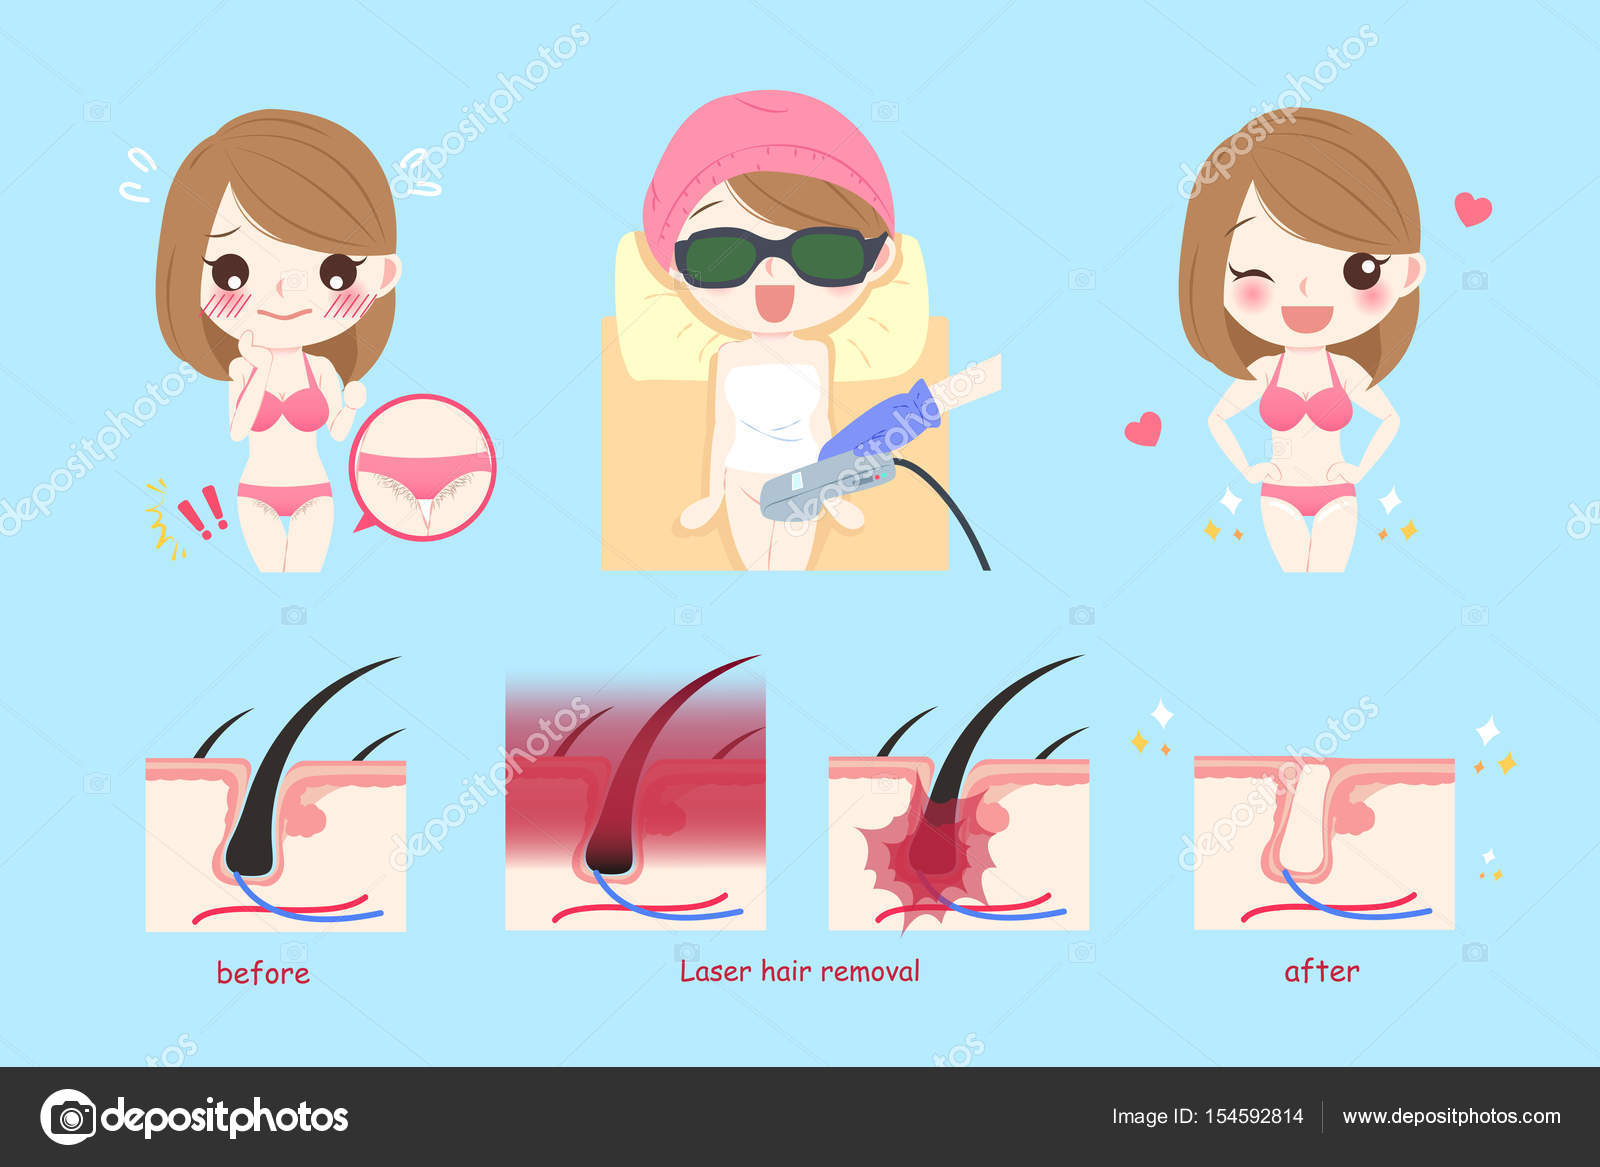 Laser hair removal Vector Art Stock Images | Depositphotos